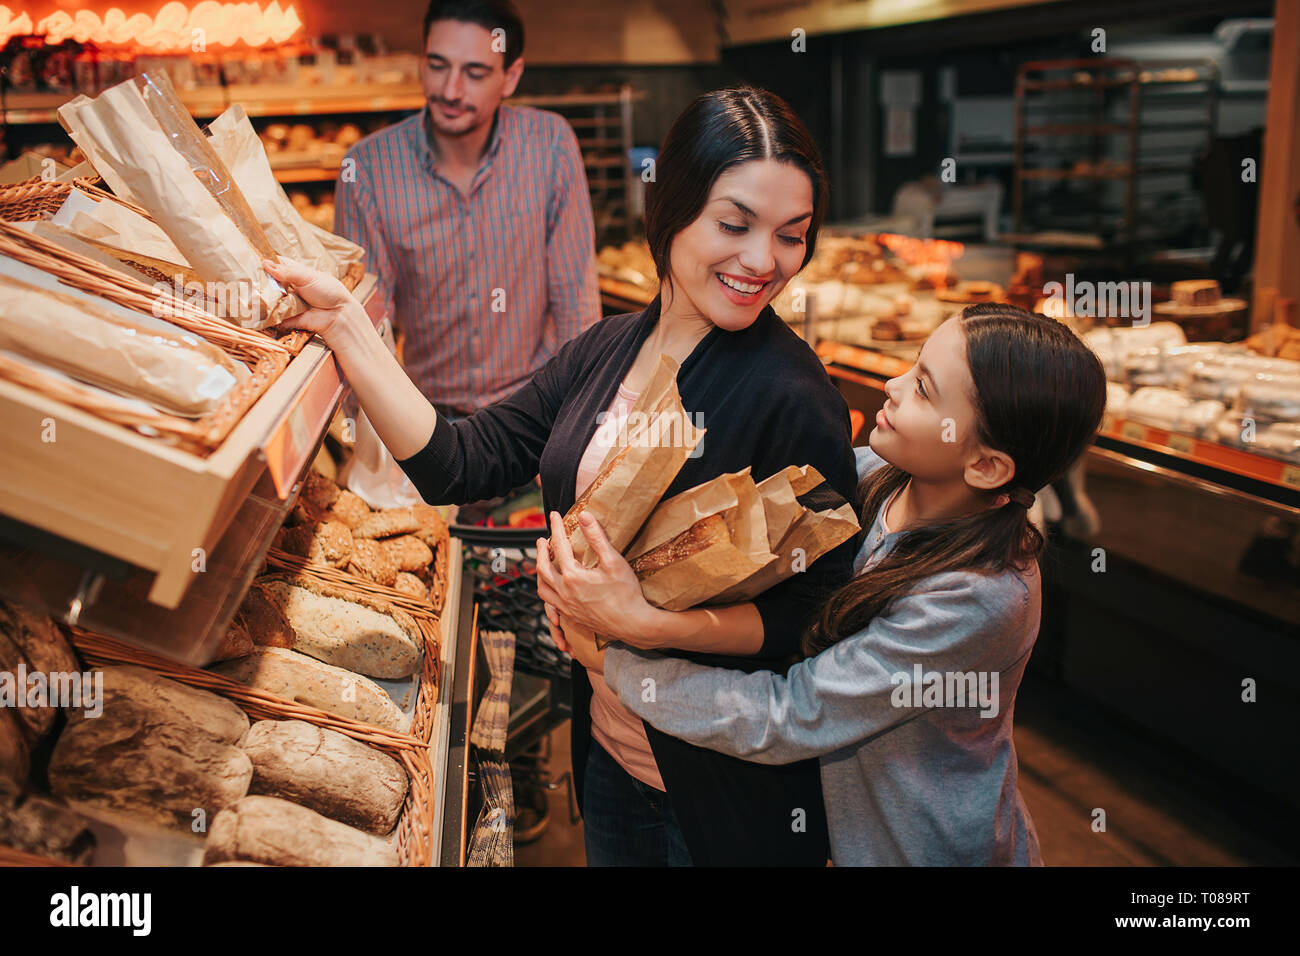 Young parents and daughter in grocery store. Cheerful mother and girl pick upb bread and rolls together. They smile to each other. Man stand behind Stock Photo